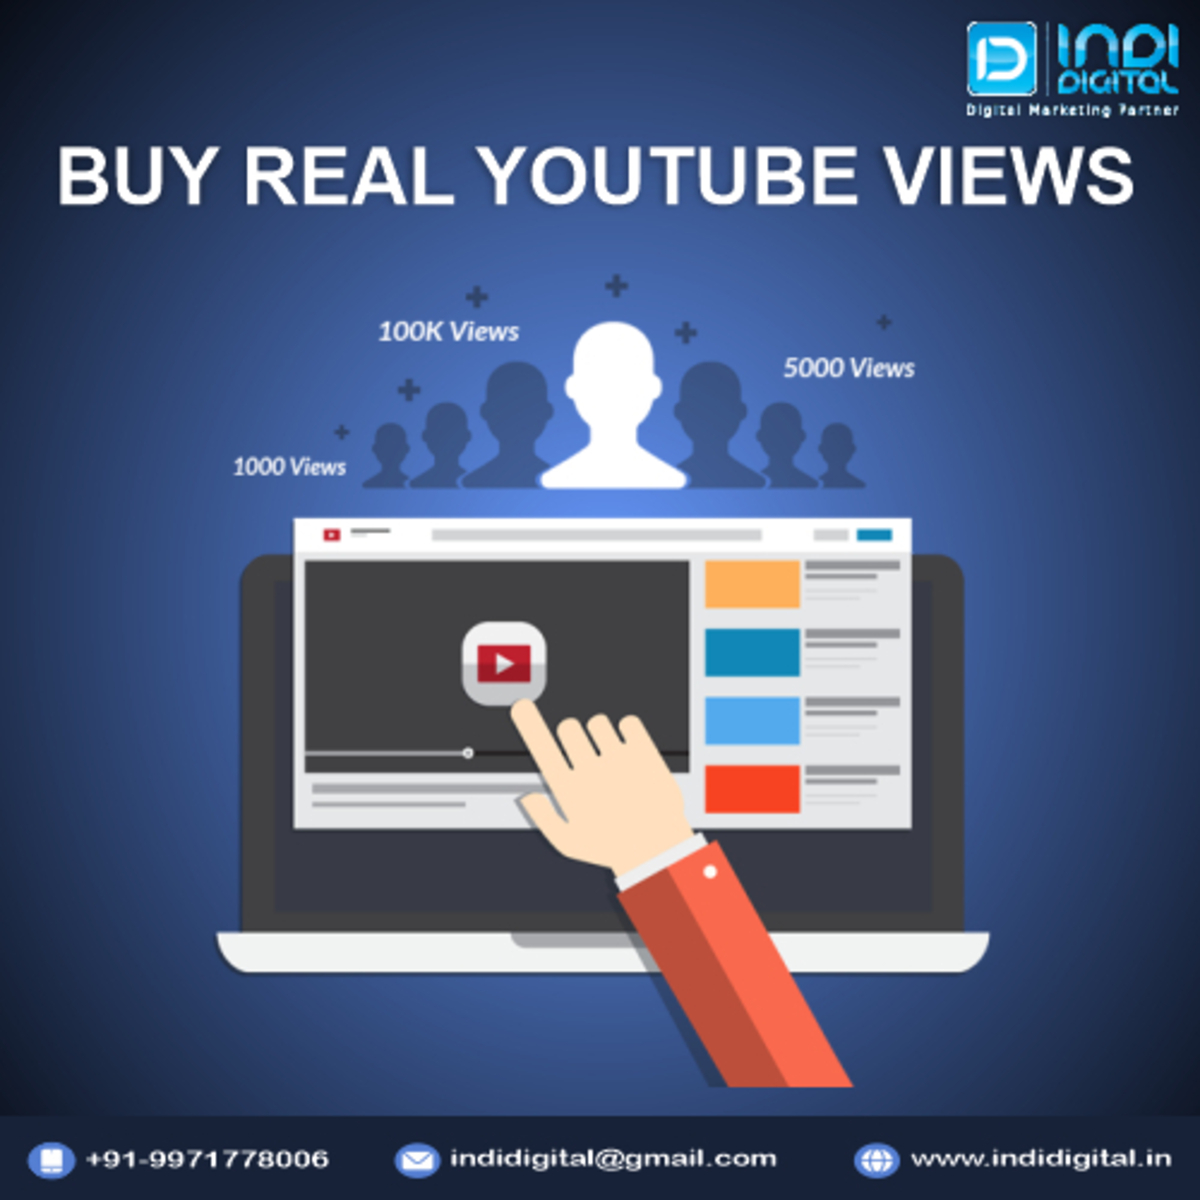 How To Buy Real YouTube Views In India